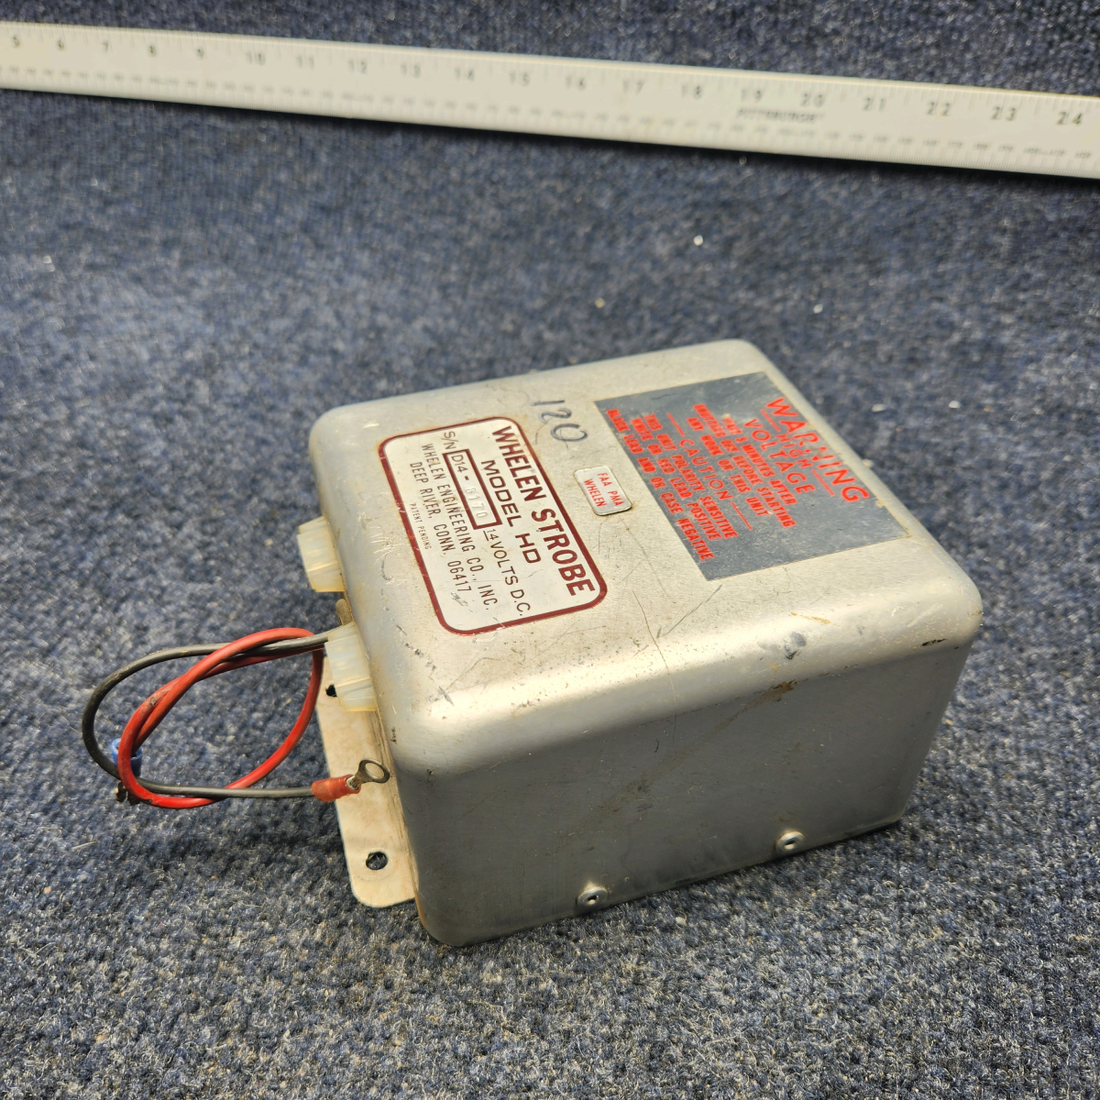 Used aircraft parts for sale, A413T2-14 DF Whelen Strobe Power Supply WHELEN STROBE LIGHT POWER SUPLY